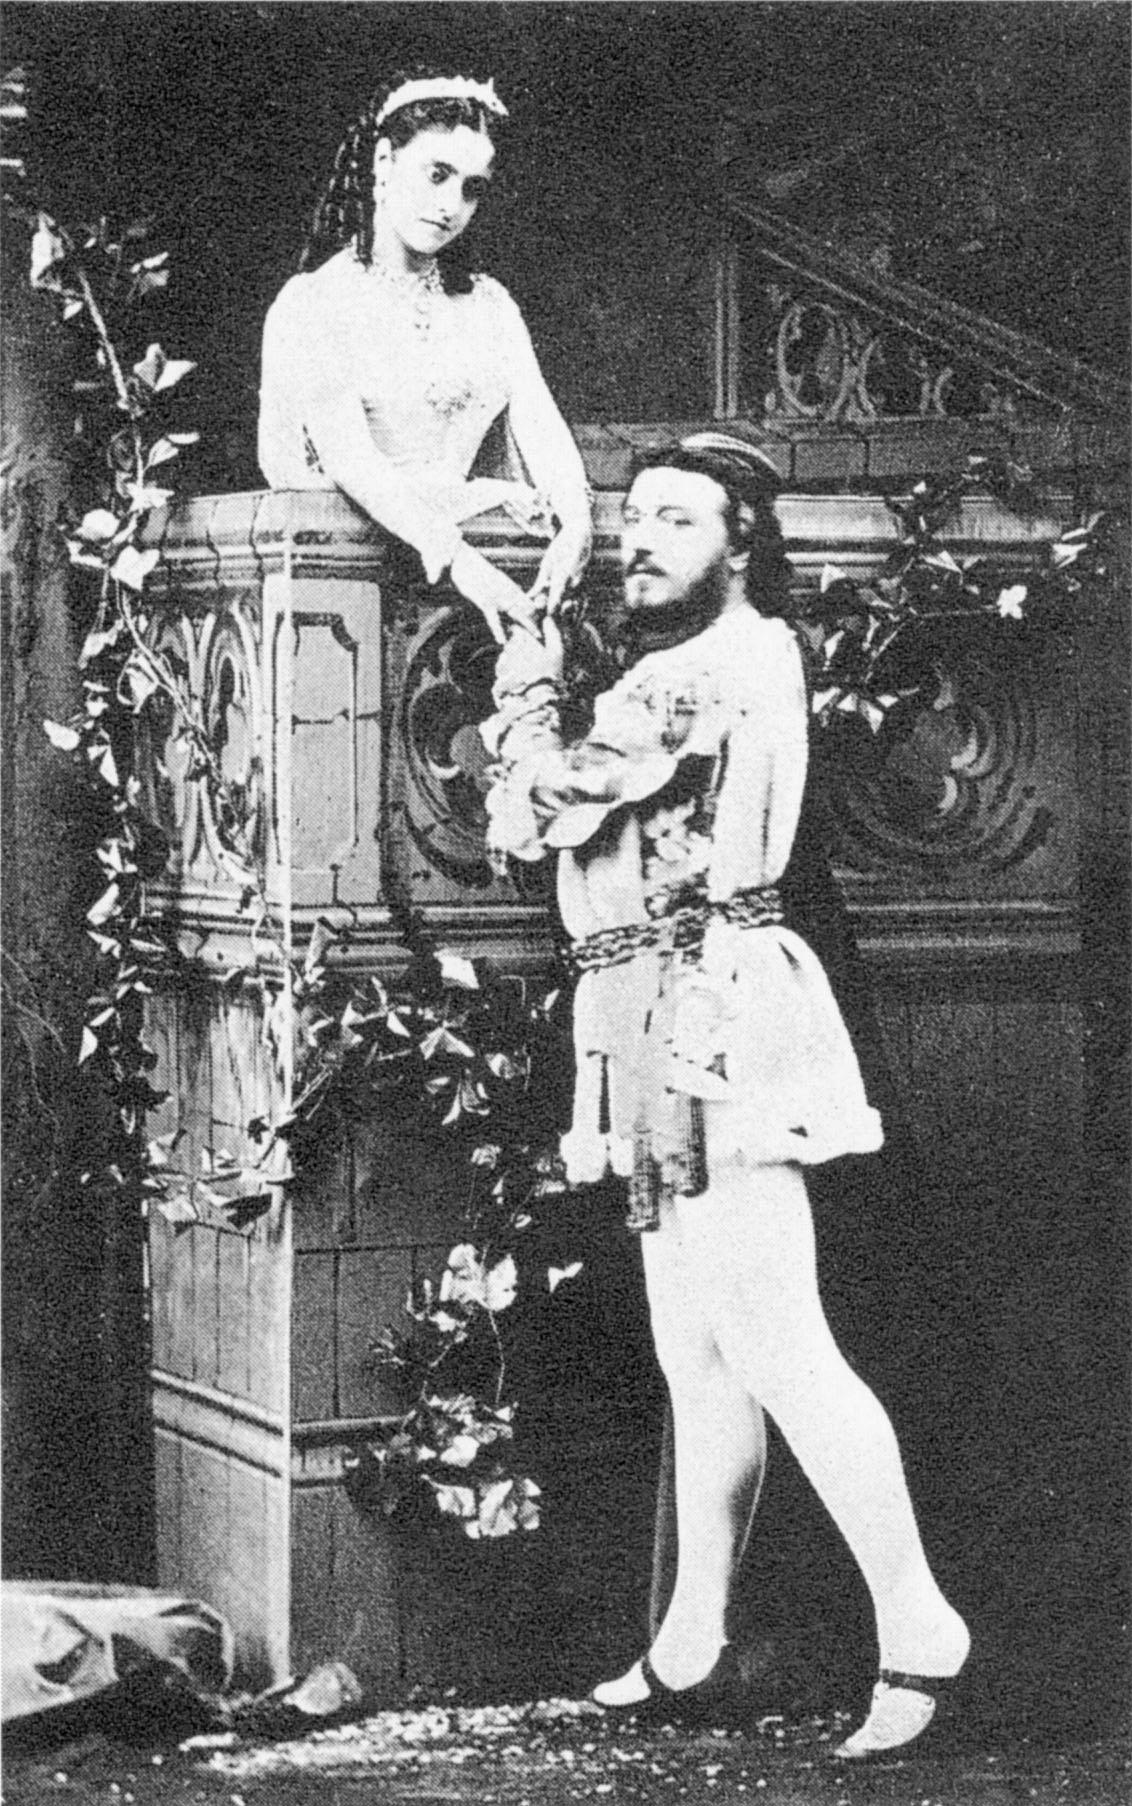 Adelina Patti and Mario in Act 2 of Gounod's "Roméo et Juliette" in the first London production at the Royal Opera House, Covent Garden, on July 11, 1867. (Public Domain)